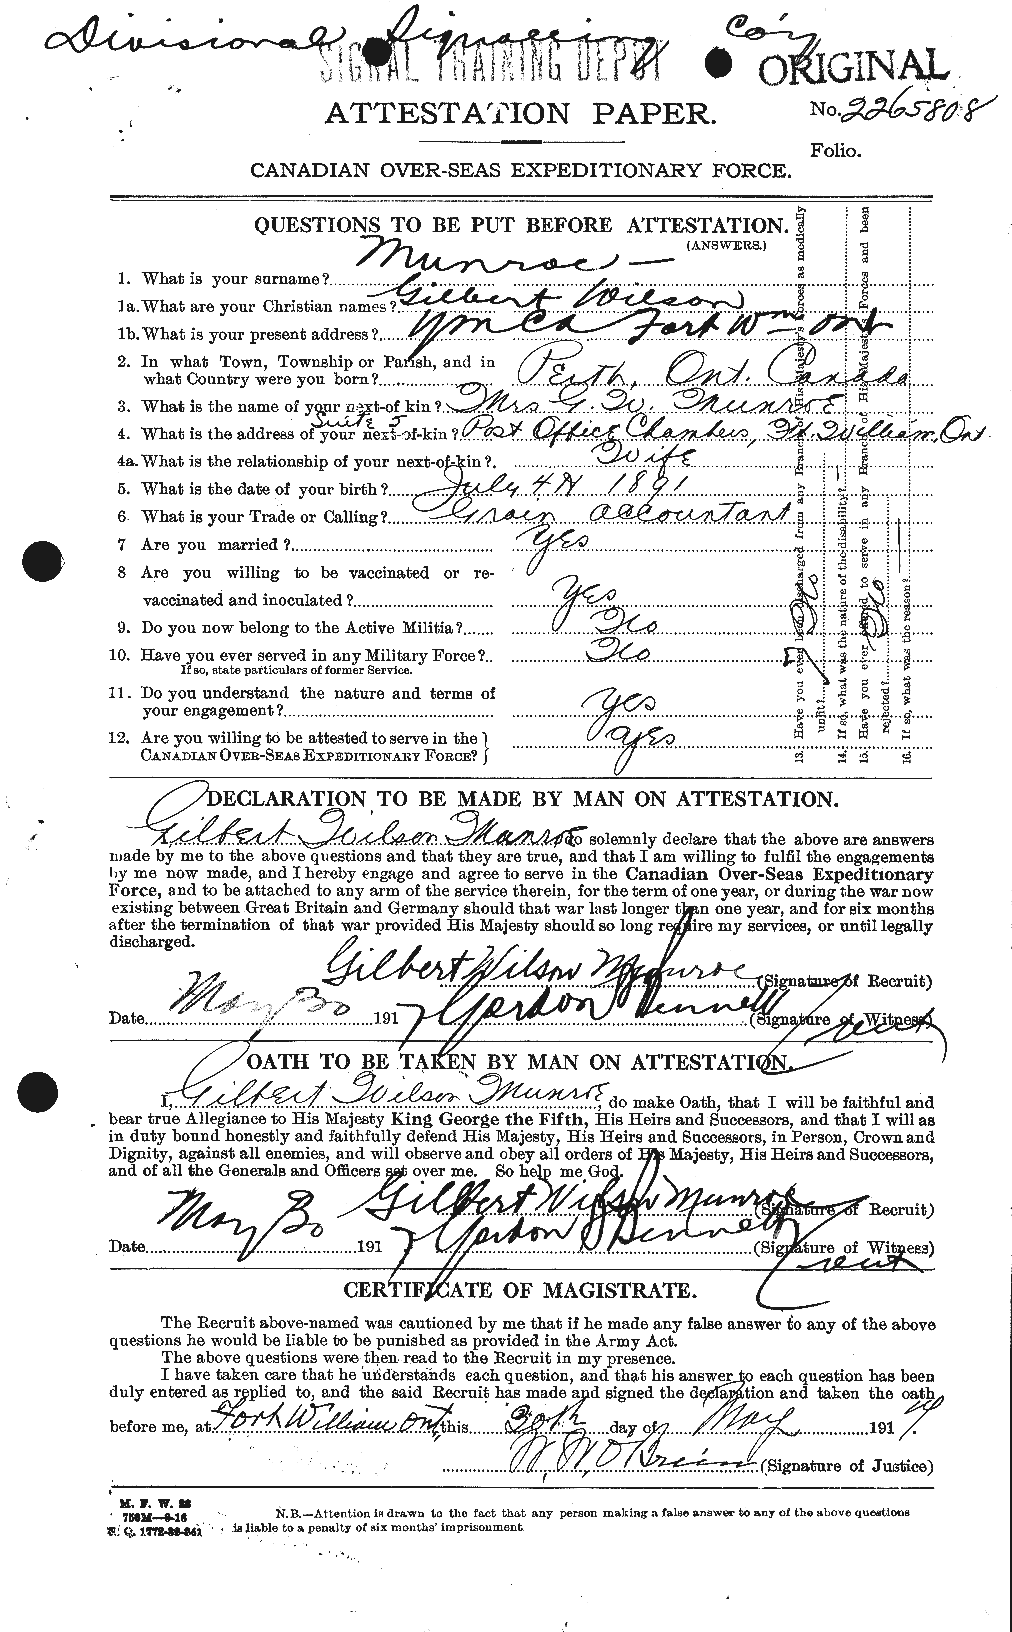 Personnel Records of the First World War - CEF 515515a